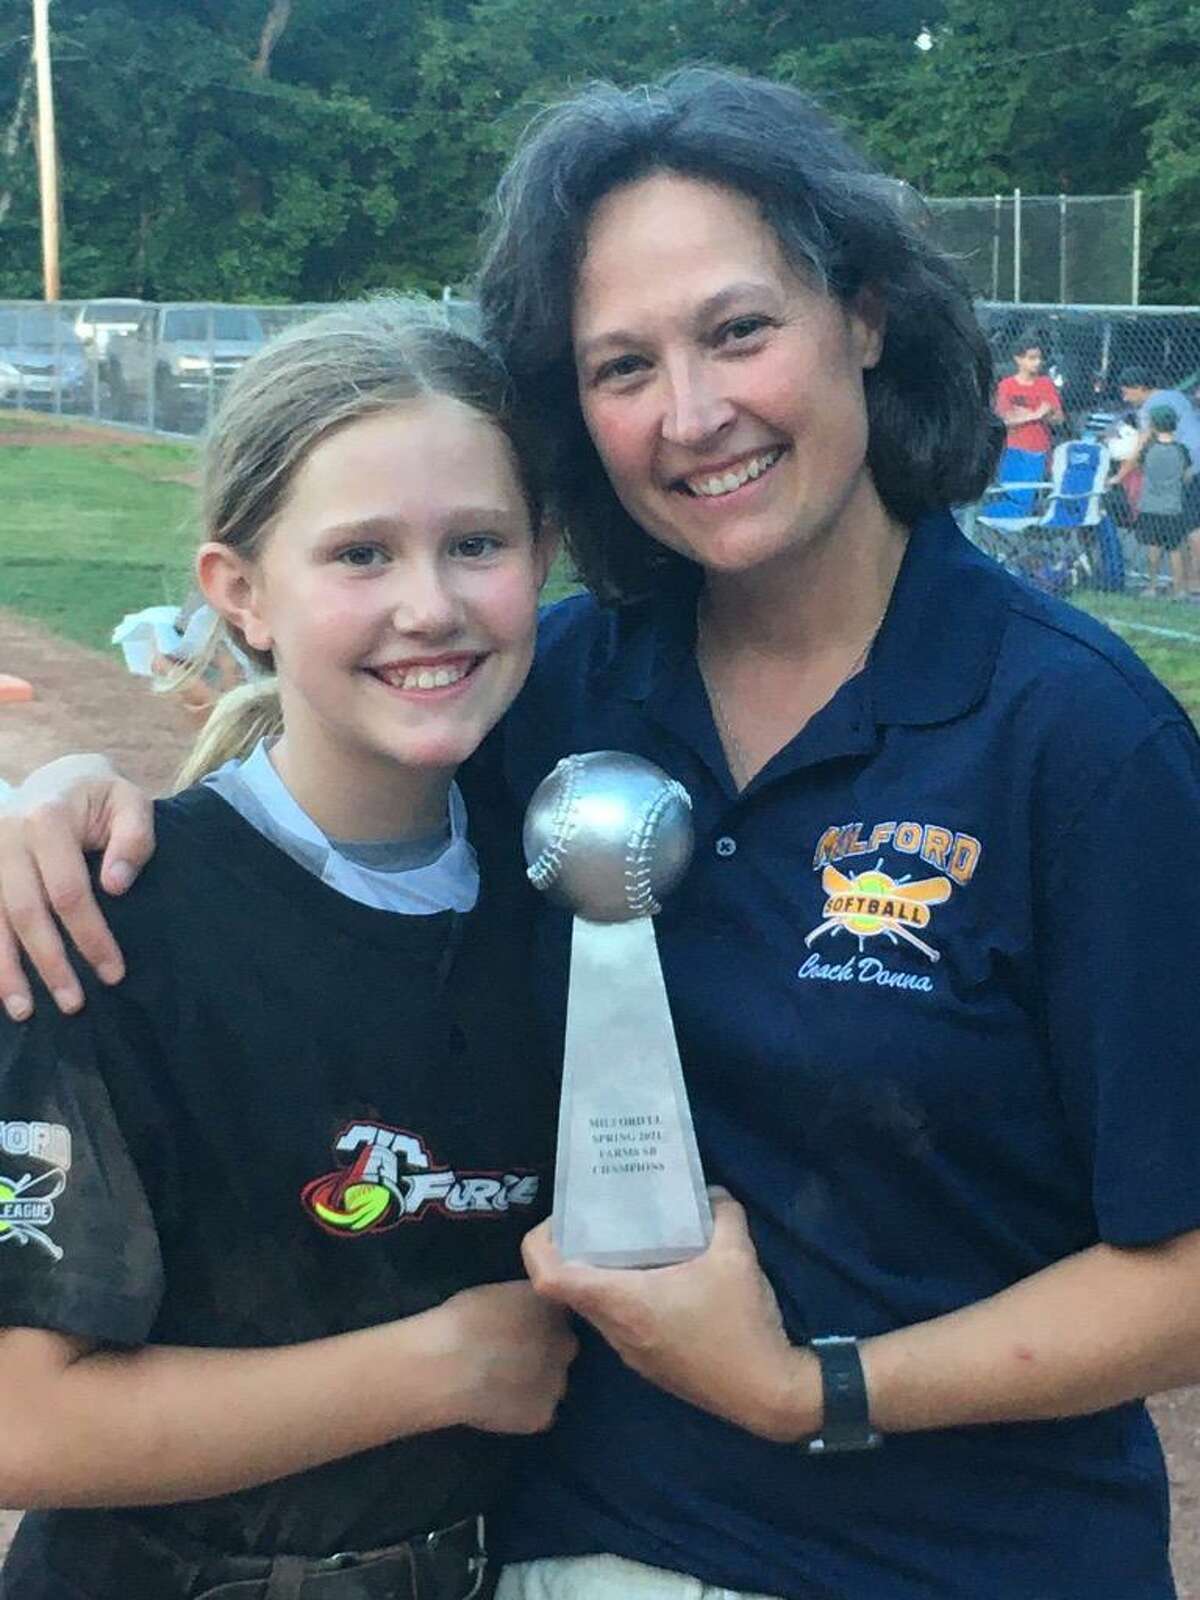 Donna Fagan, right, coached her daughter Riley Fagan-Davis to the 2021 Milford Little League Farms Division title. Fagan-Davis is a part of the Milford team that will play in the Little League Softball World Series Aug. 9-15 in Greenville, N.C.